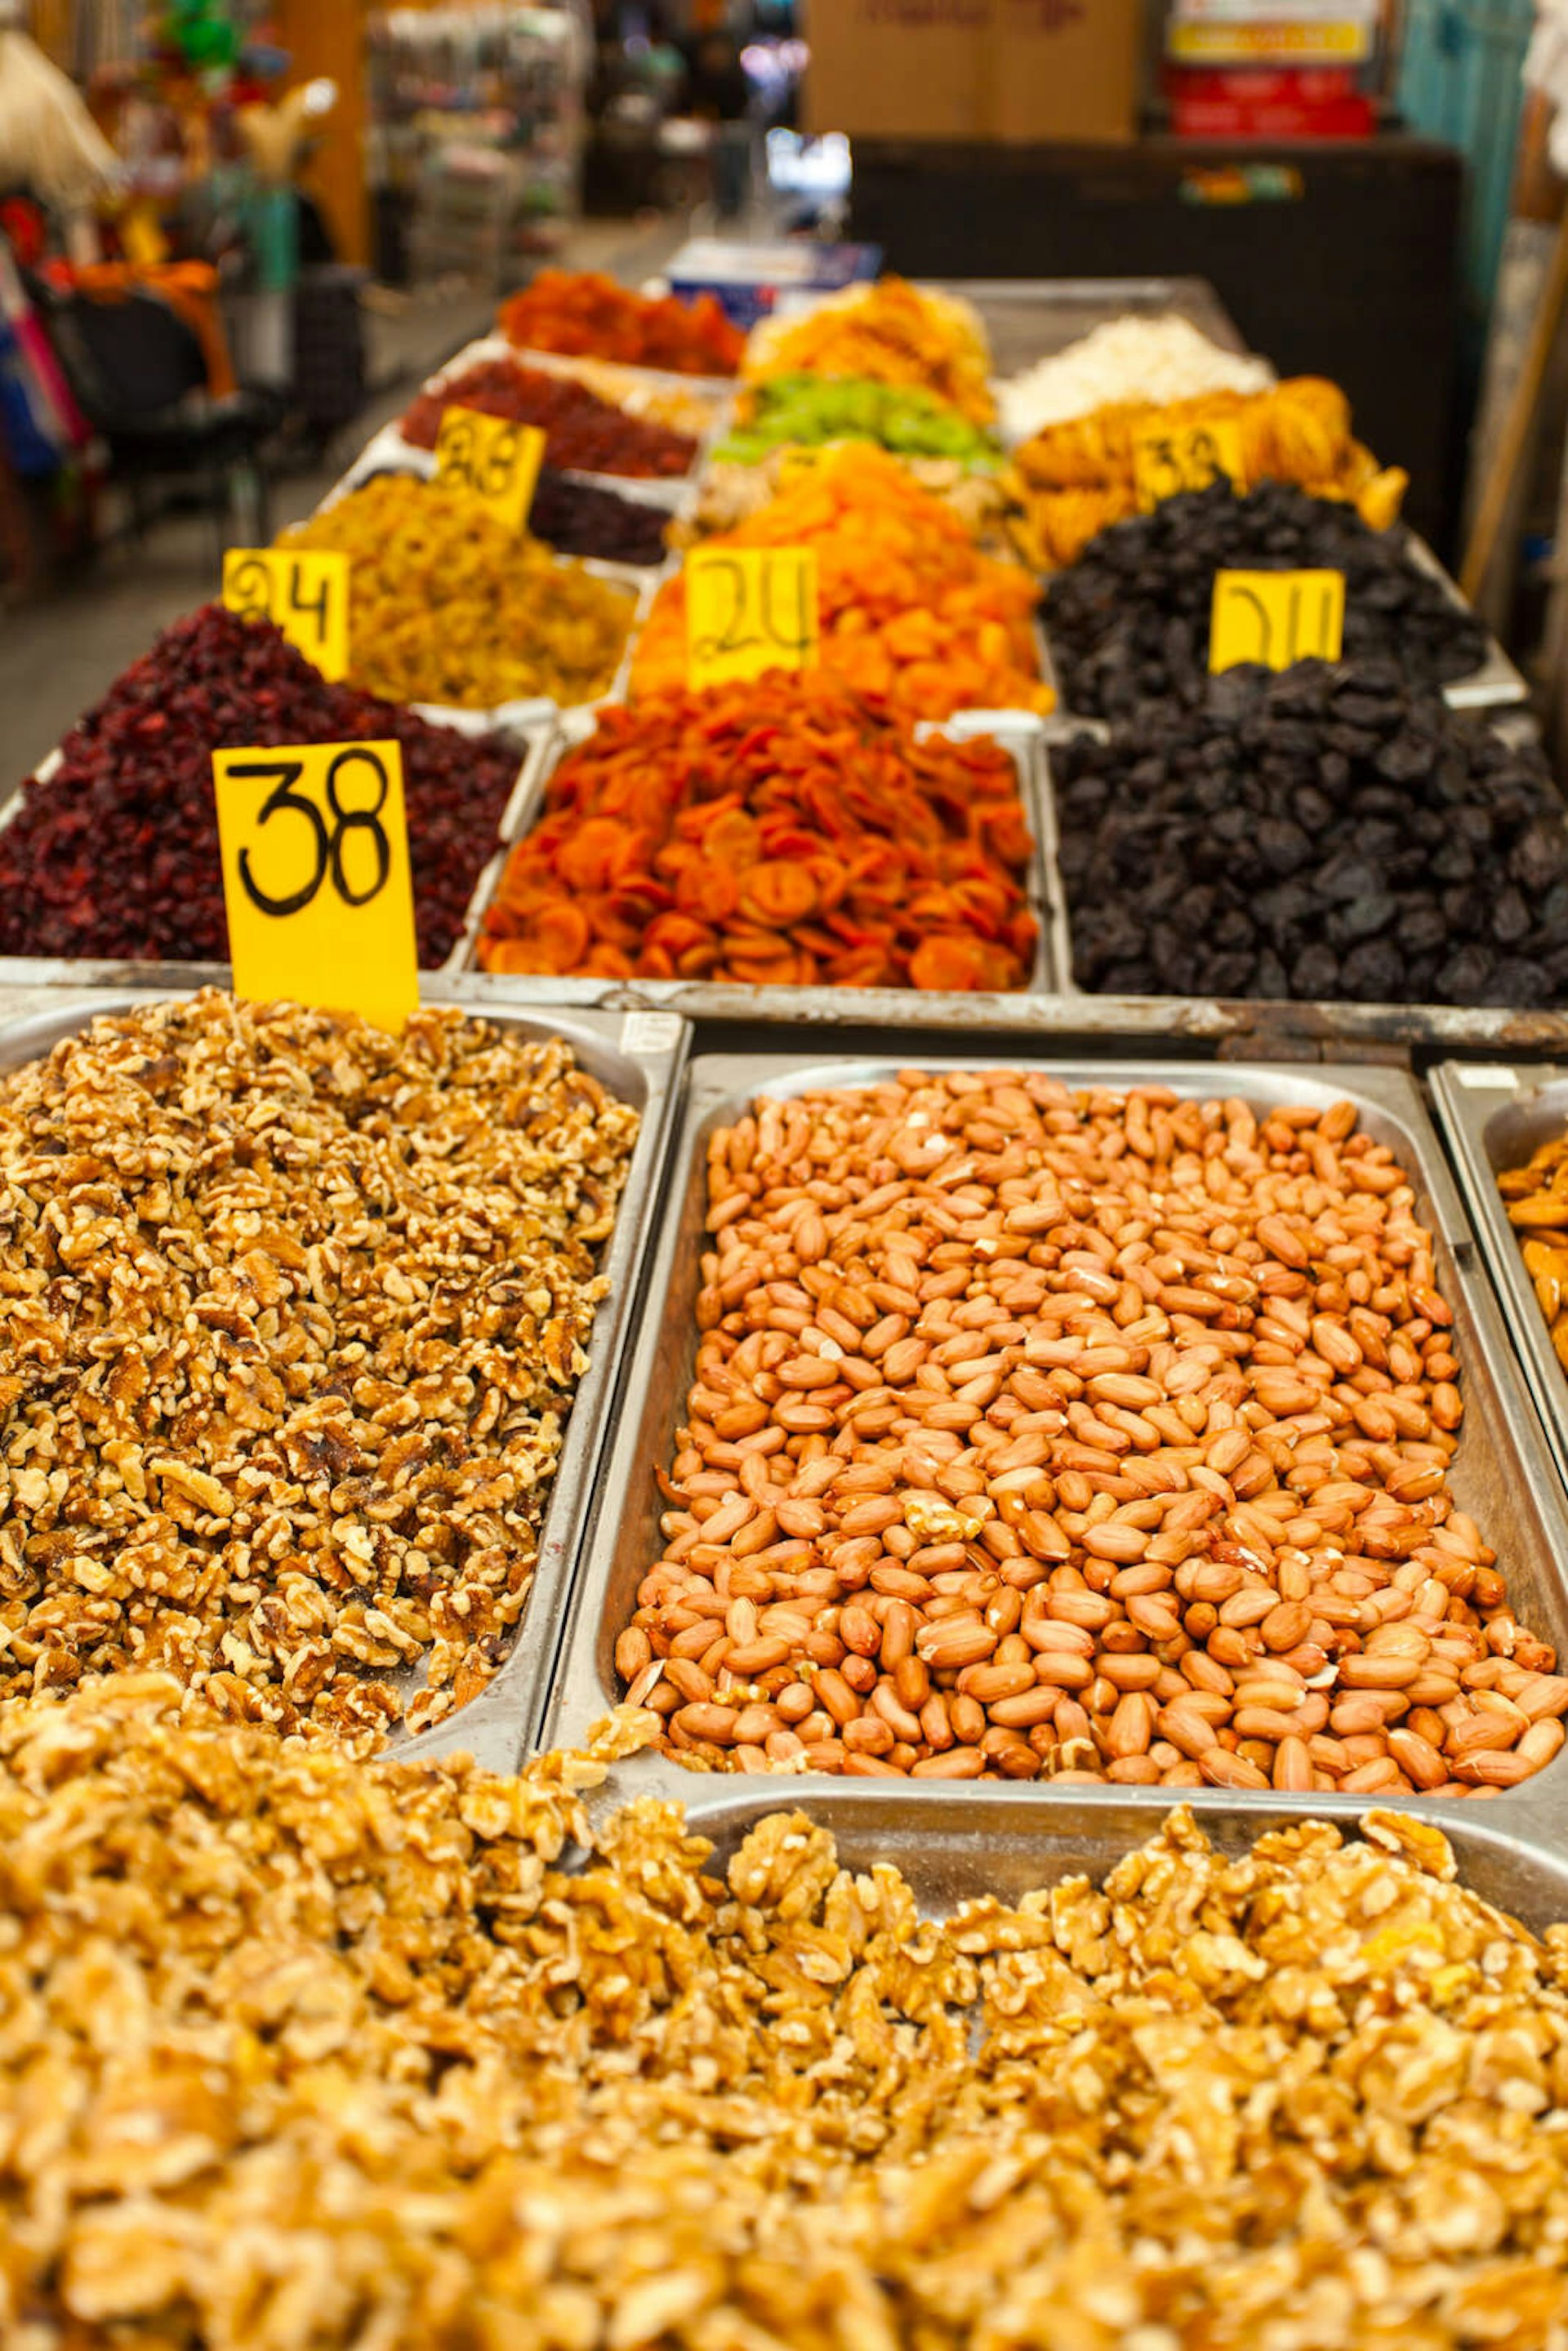 Spices at Mahane Yehuda Market in Jerusalem. Image by LALS STOCK / Shutterstock